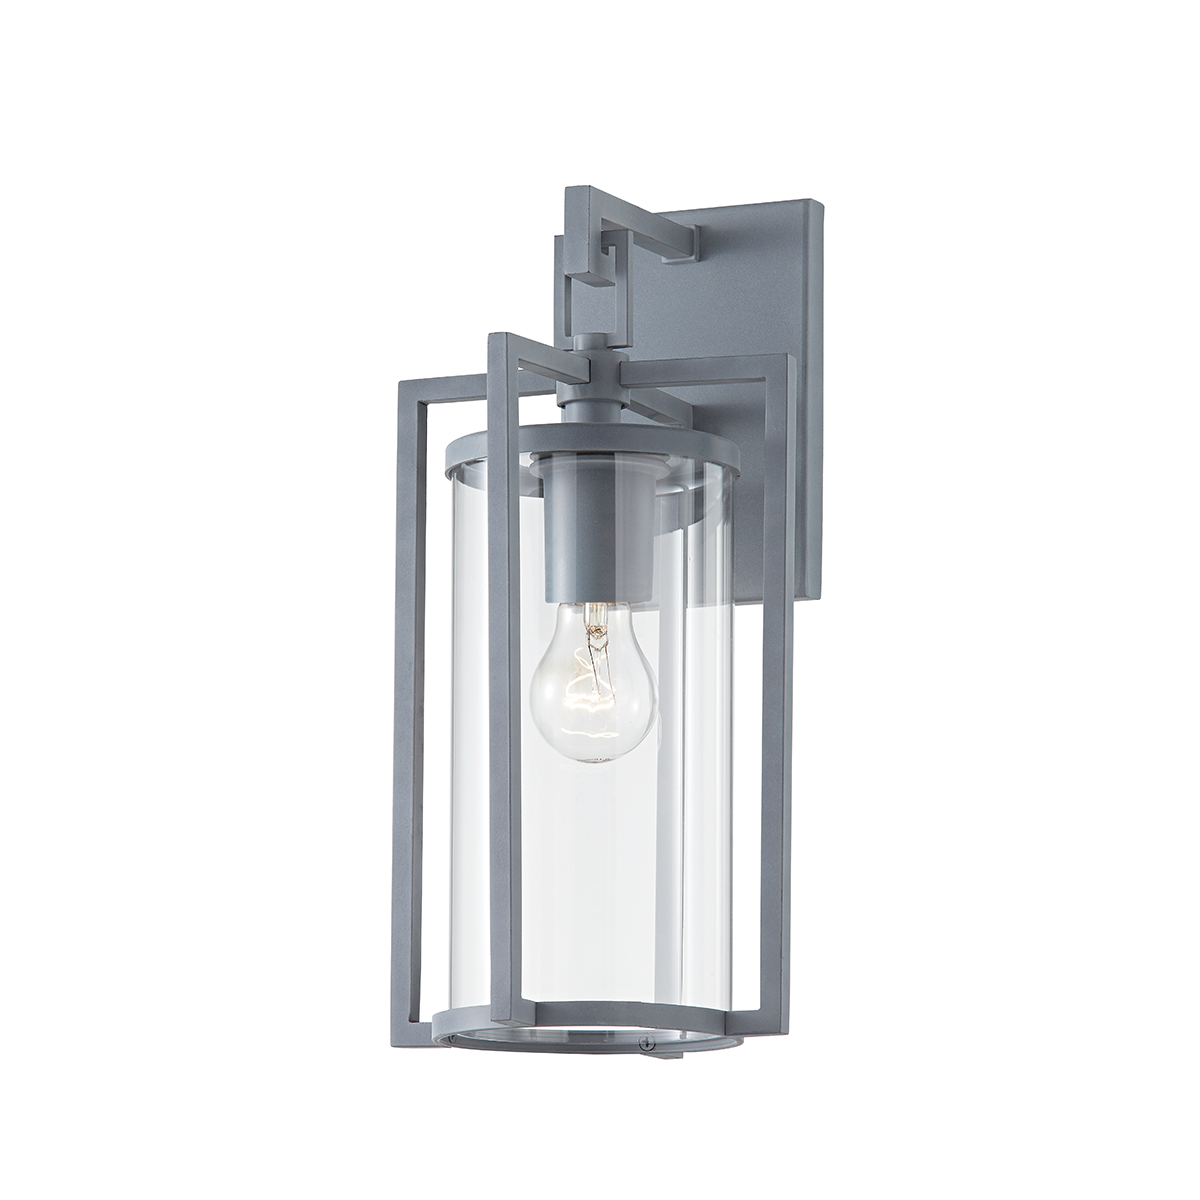 Troy Lighting 1 LIGHT SMALL EXTERIOR WALL SCONCE B1141 Outdoor l Wall Troy Lighting WEATHERED ZINC  